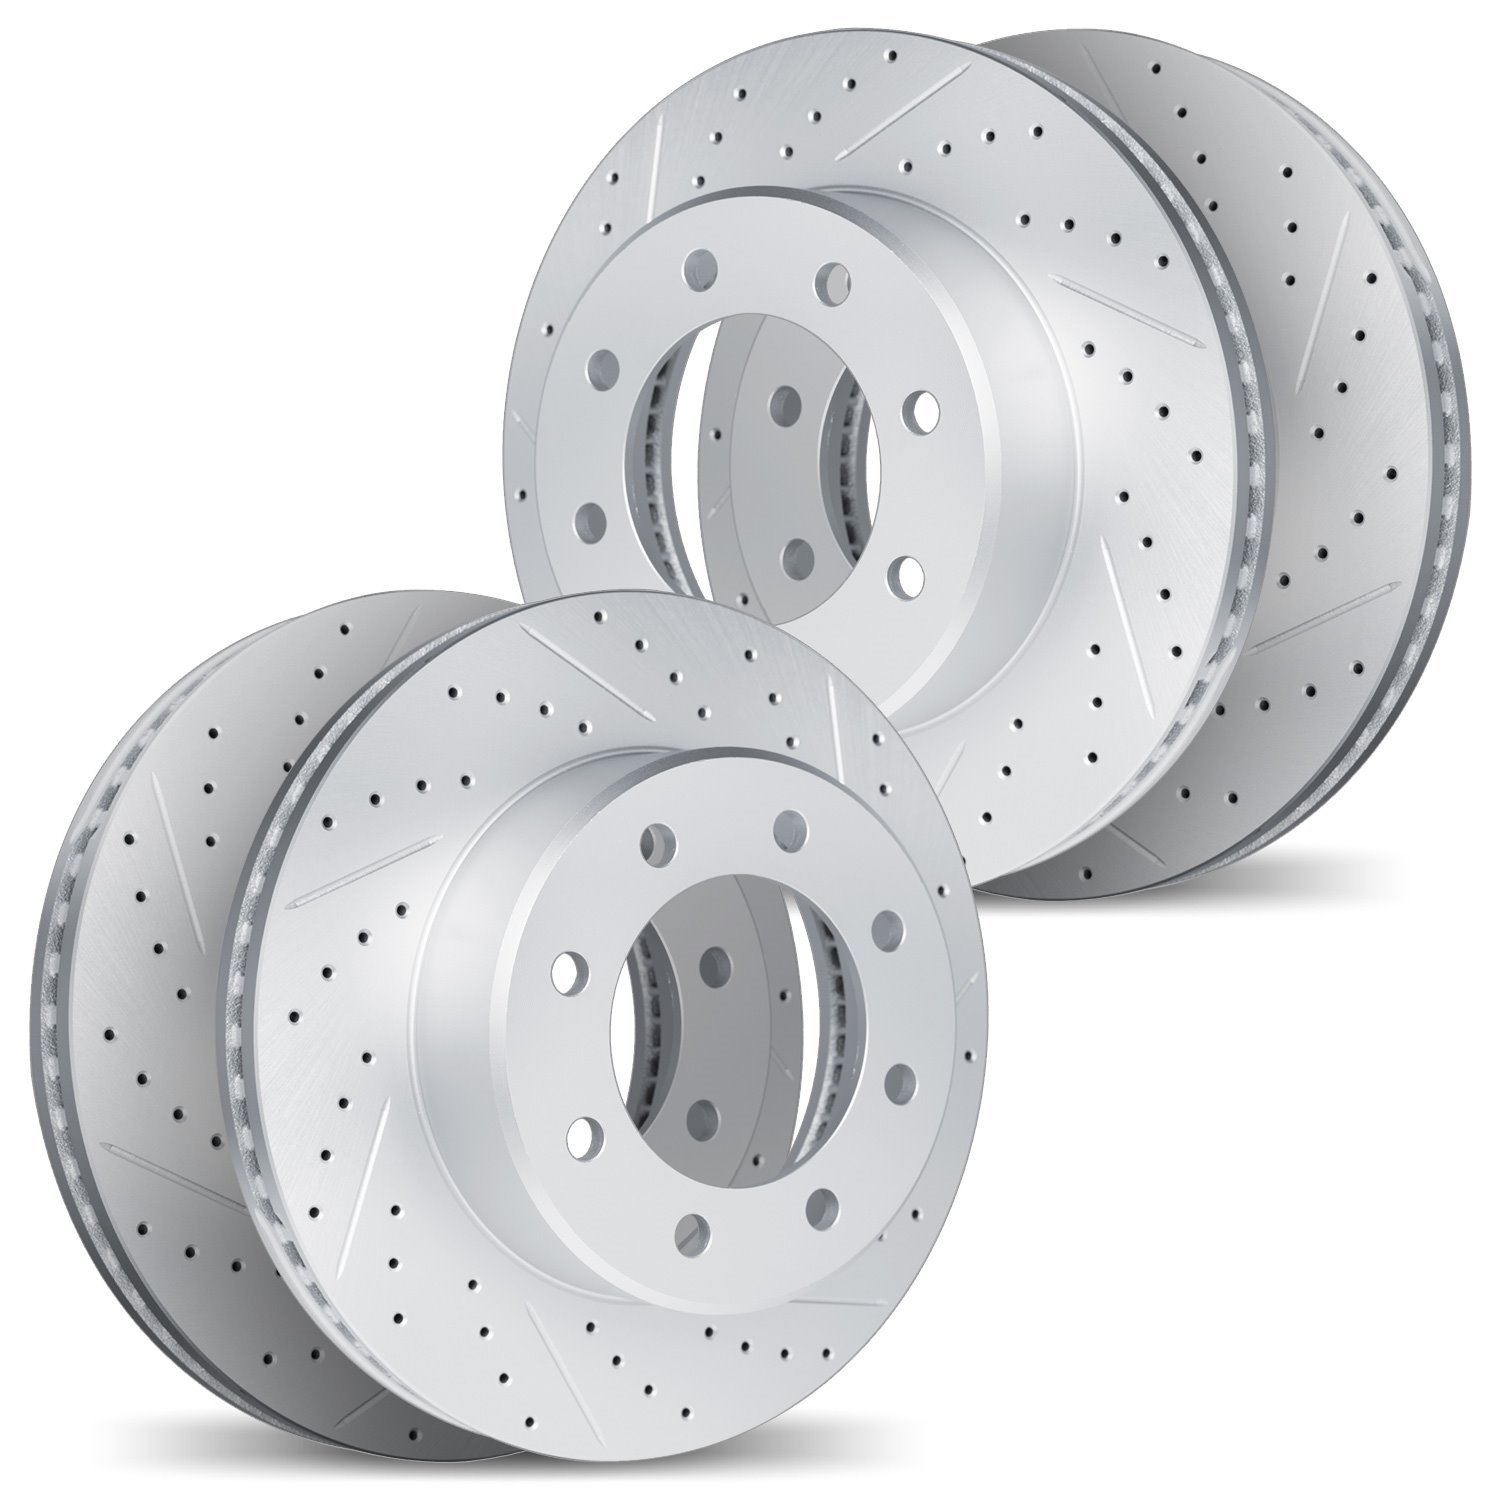 2004-54032 Geoperformance Drilled/Slotted Brake Rotors, Fits Select Ford/Lincoln/Mercury/Mazda, Position: Front and Rear